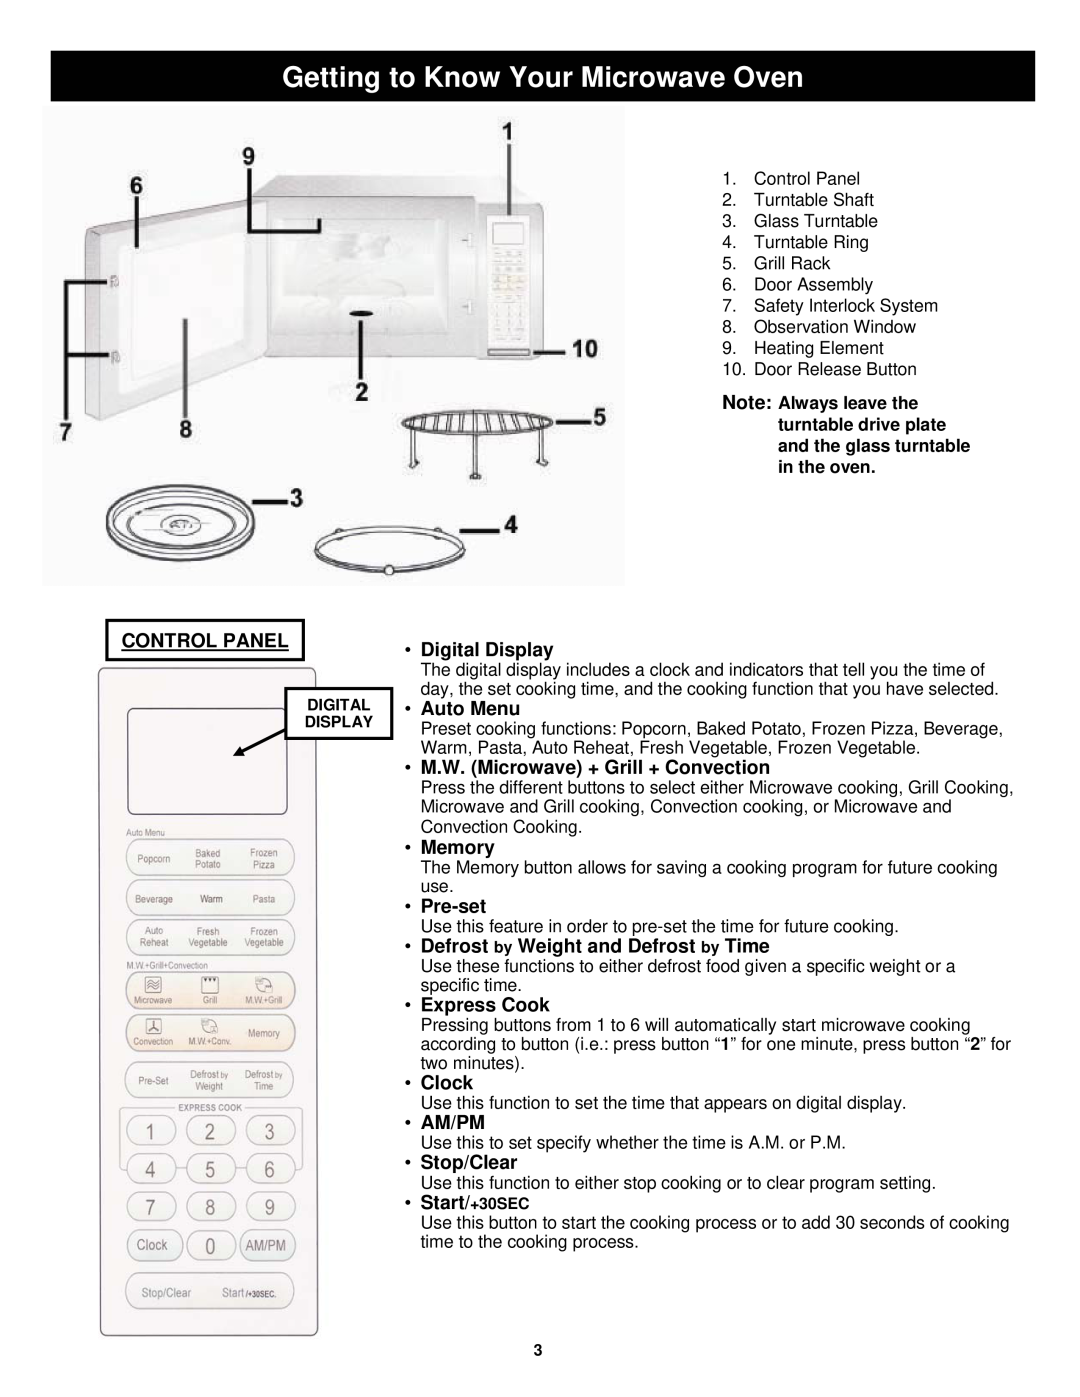 Euro-Pro K5309H owner manual Getting to Know Your Microwave Oven 